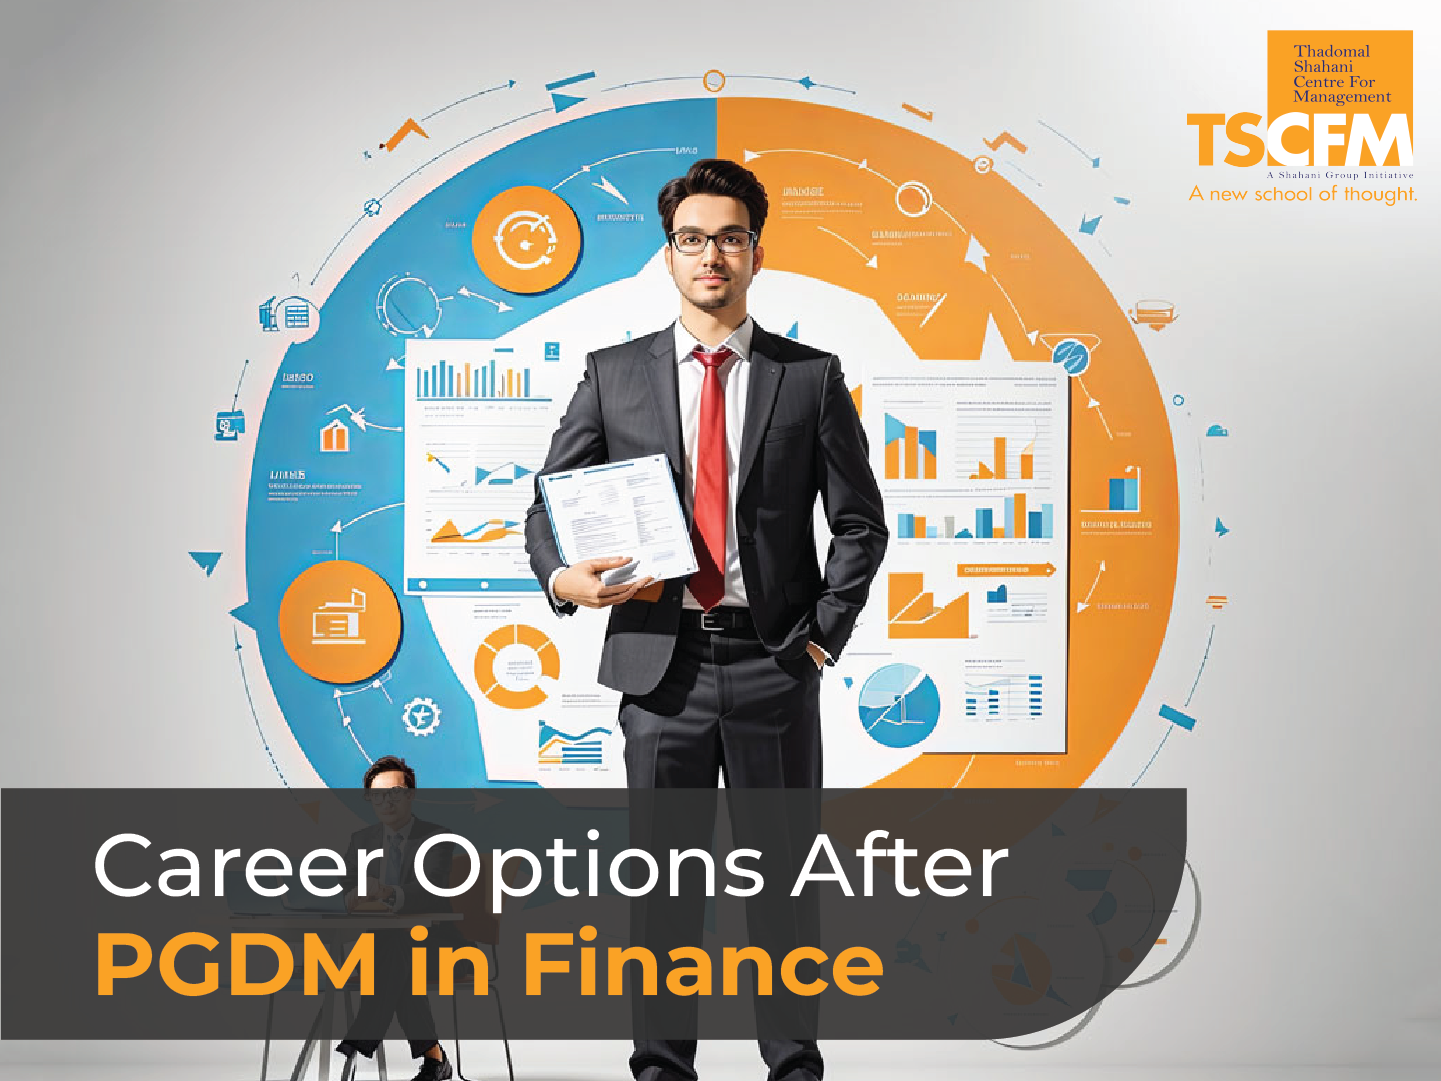 Top Career Opportunities After PGDM in Finance